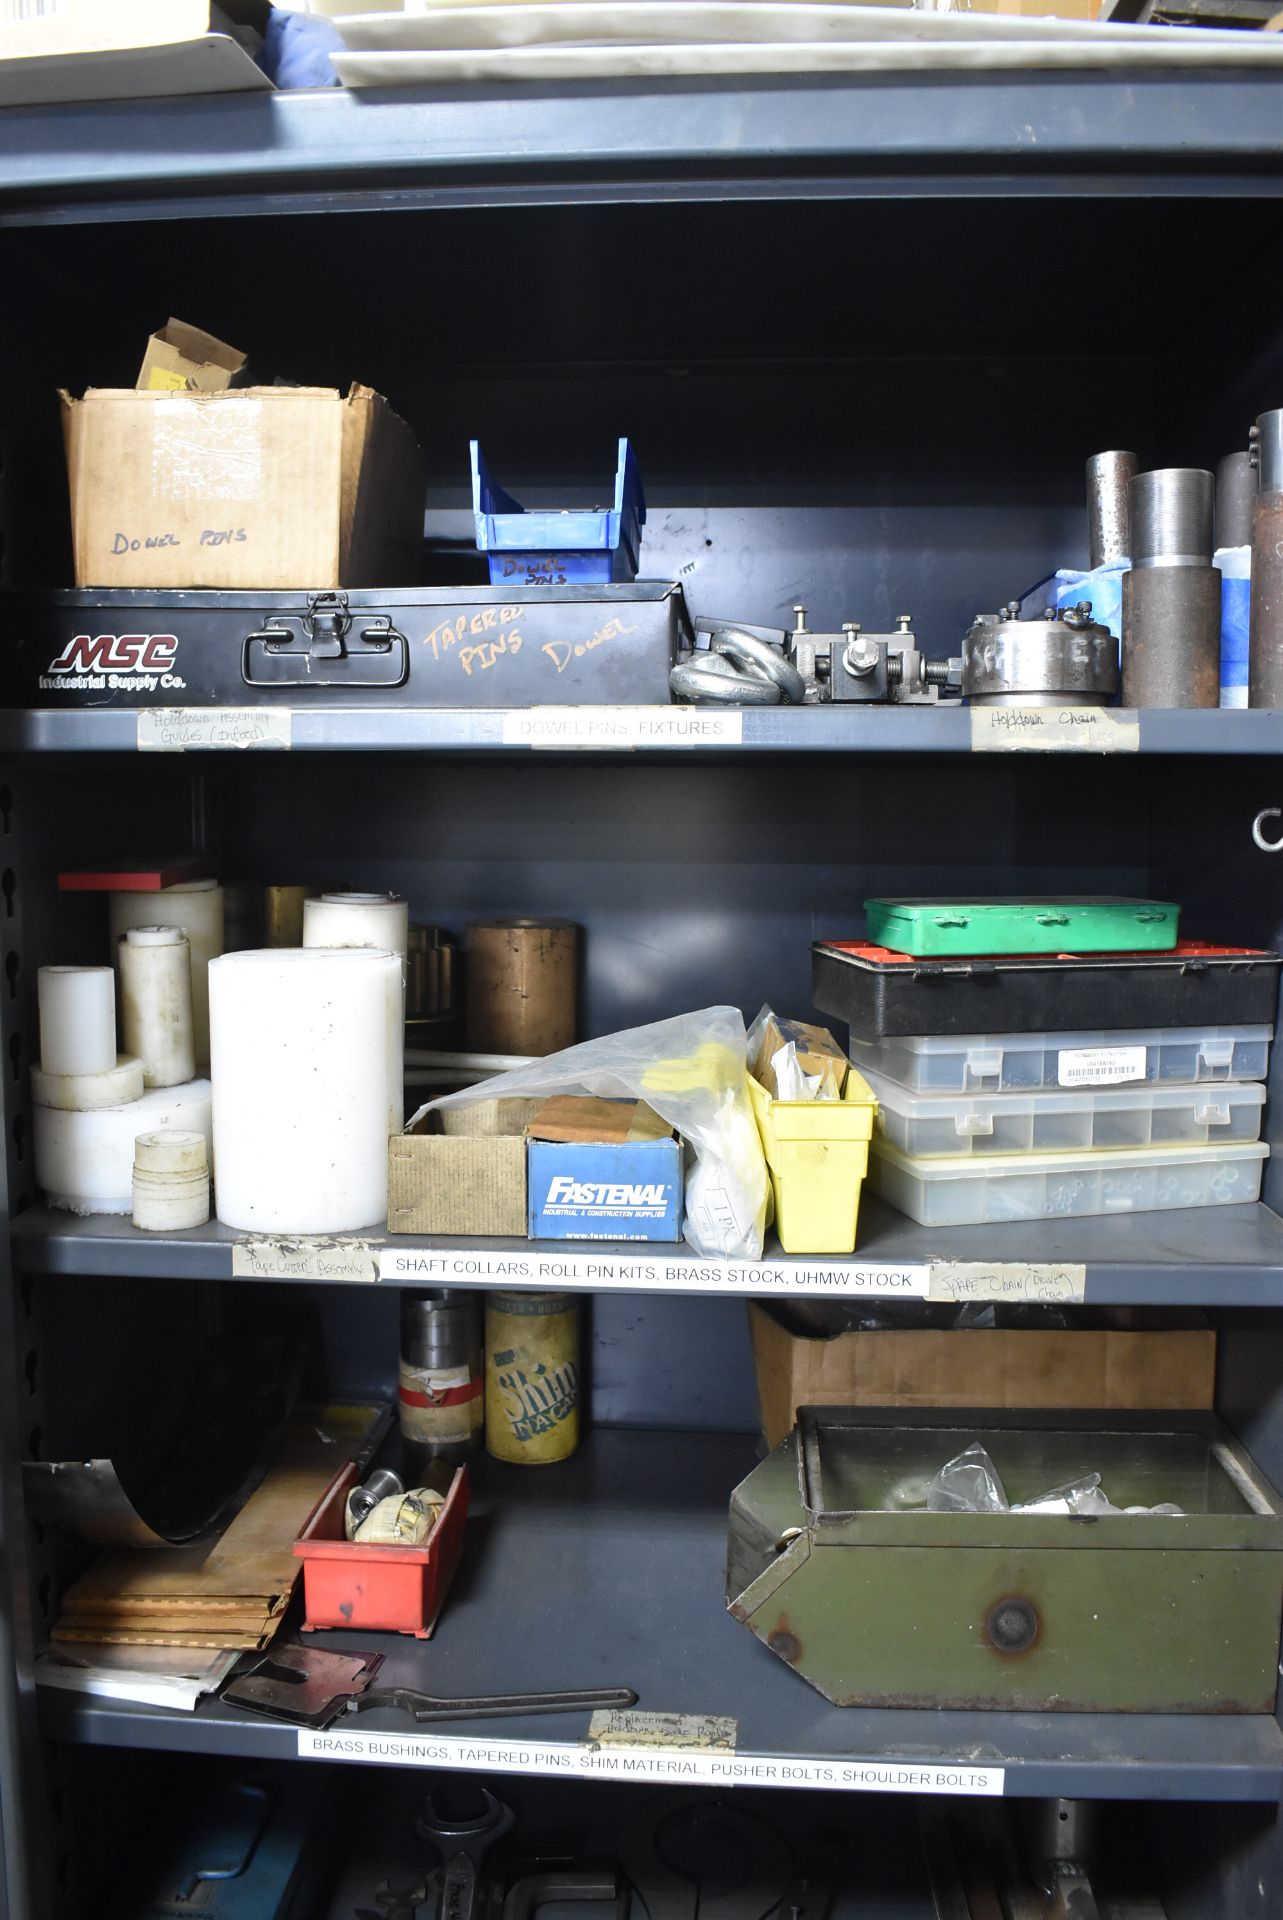 LOT/ CONTENTS OF CABINET - INCLUDING DOWEL PINS, FIXTURES, SHAFT COLLARS, ROLL PIN KITS, BRASS & - Image 2 of 3